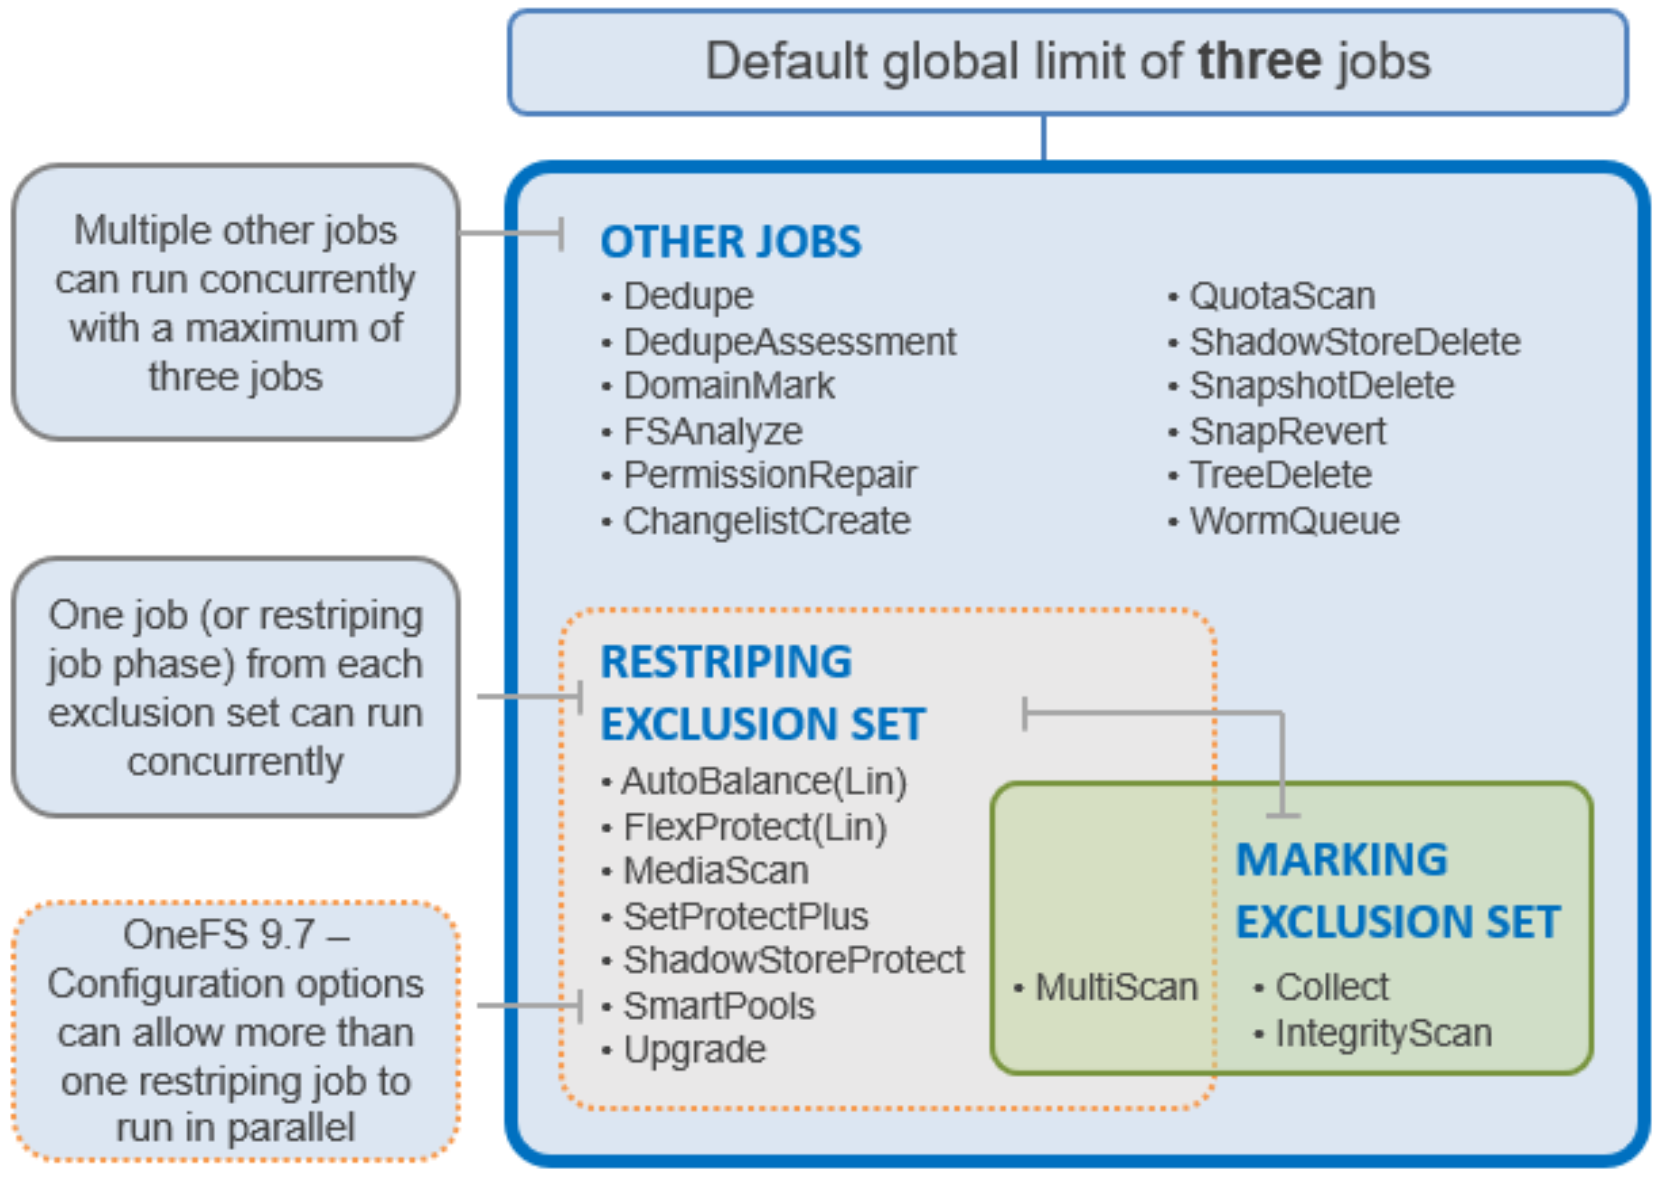 Venn diagram style graphic grouping the OneFS job engine jobs by their exclusion sets.